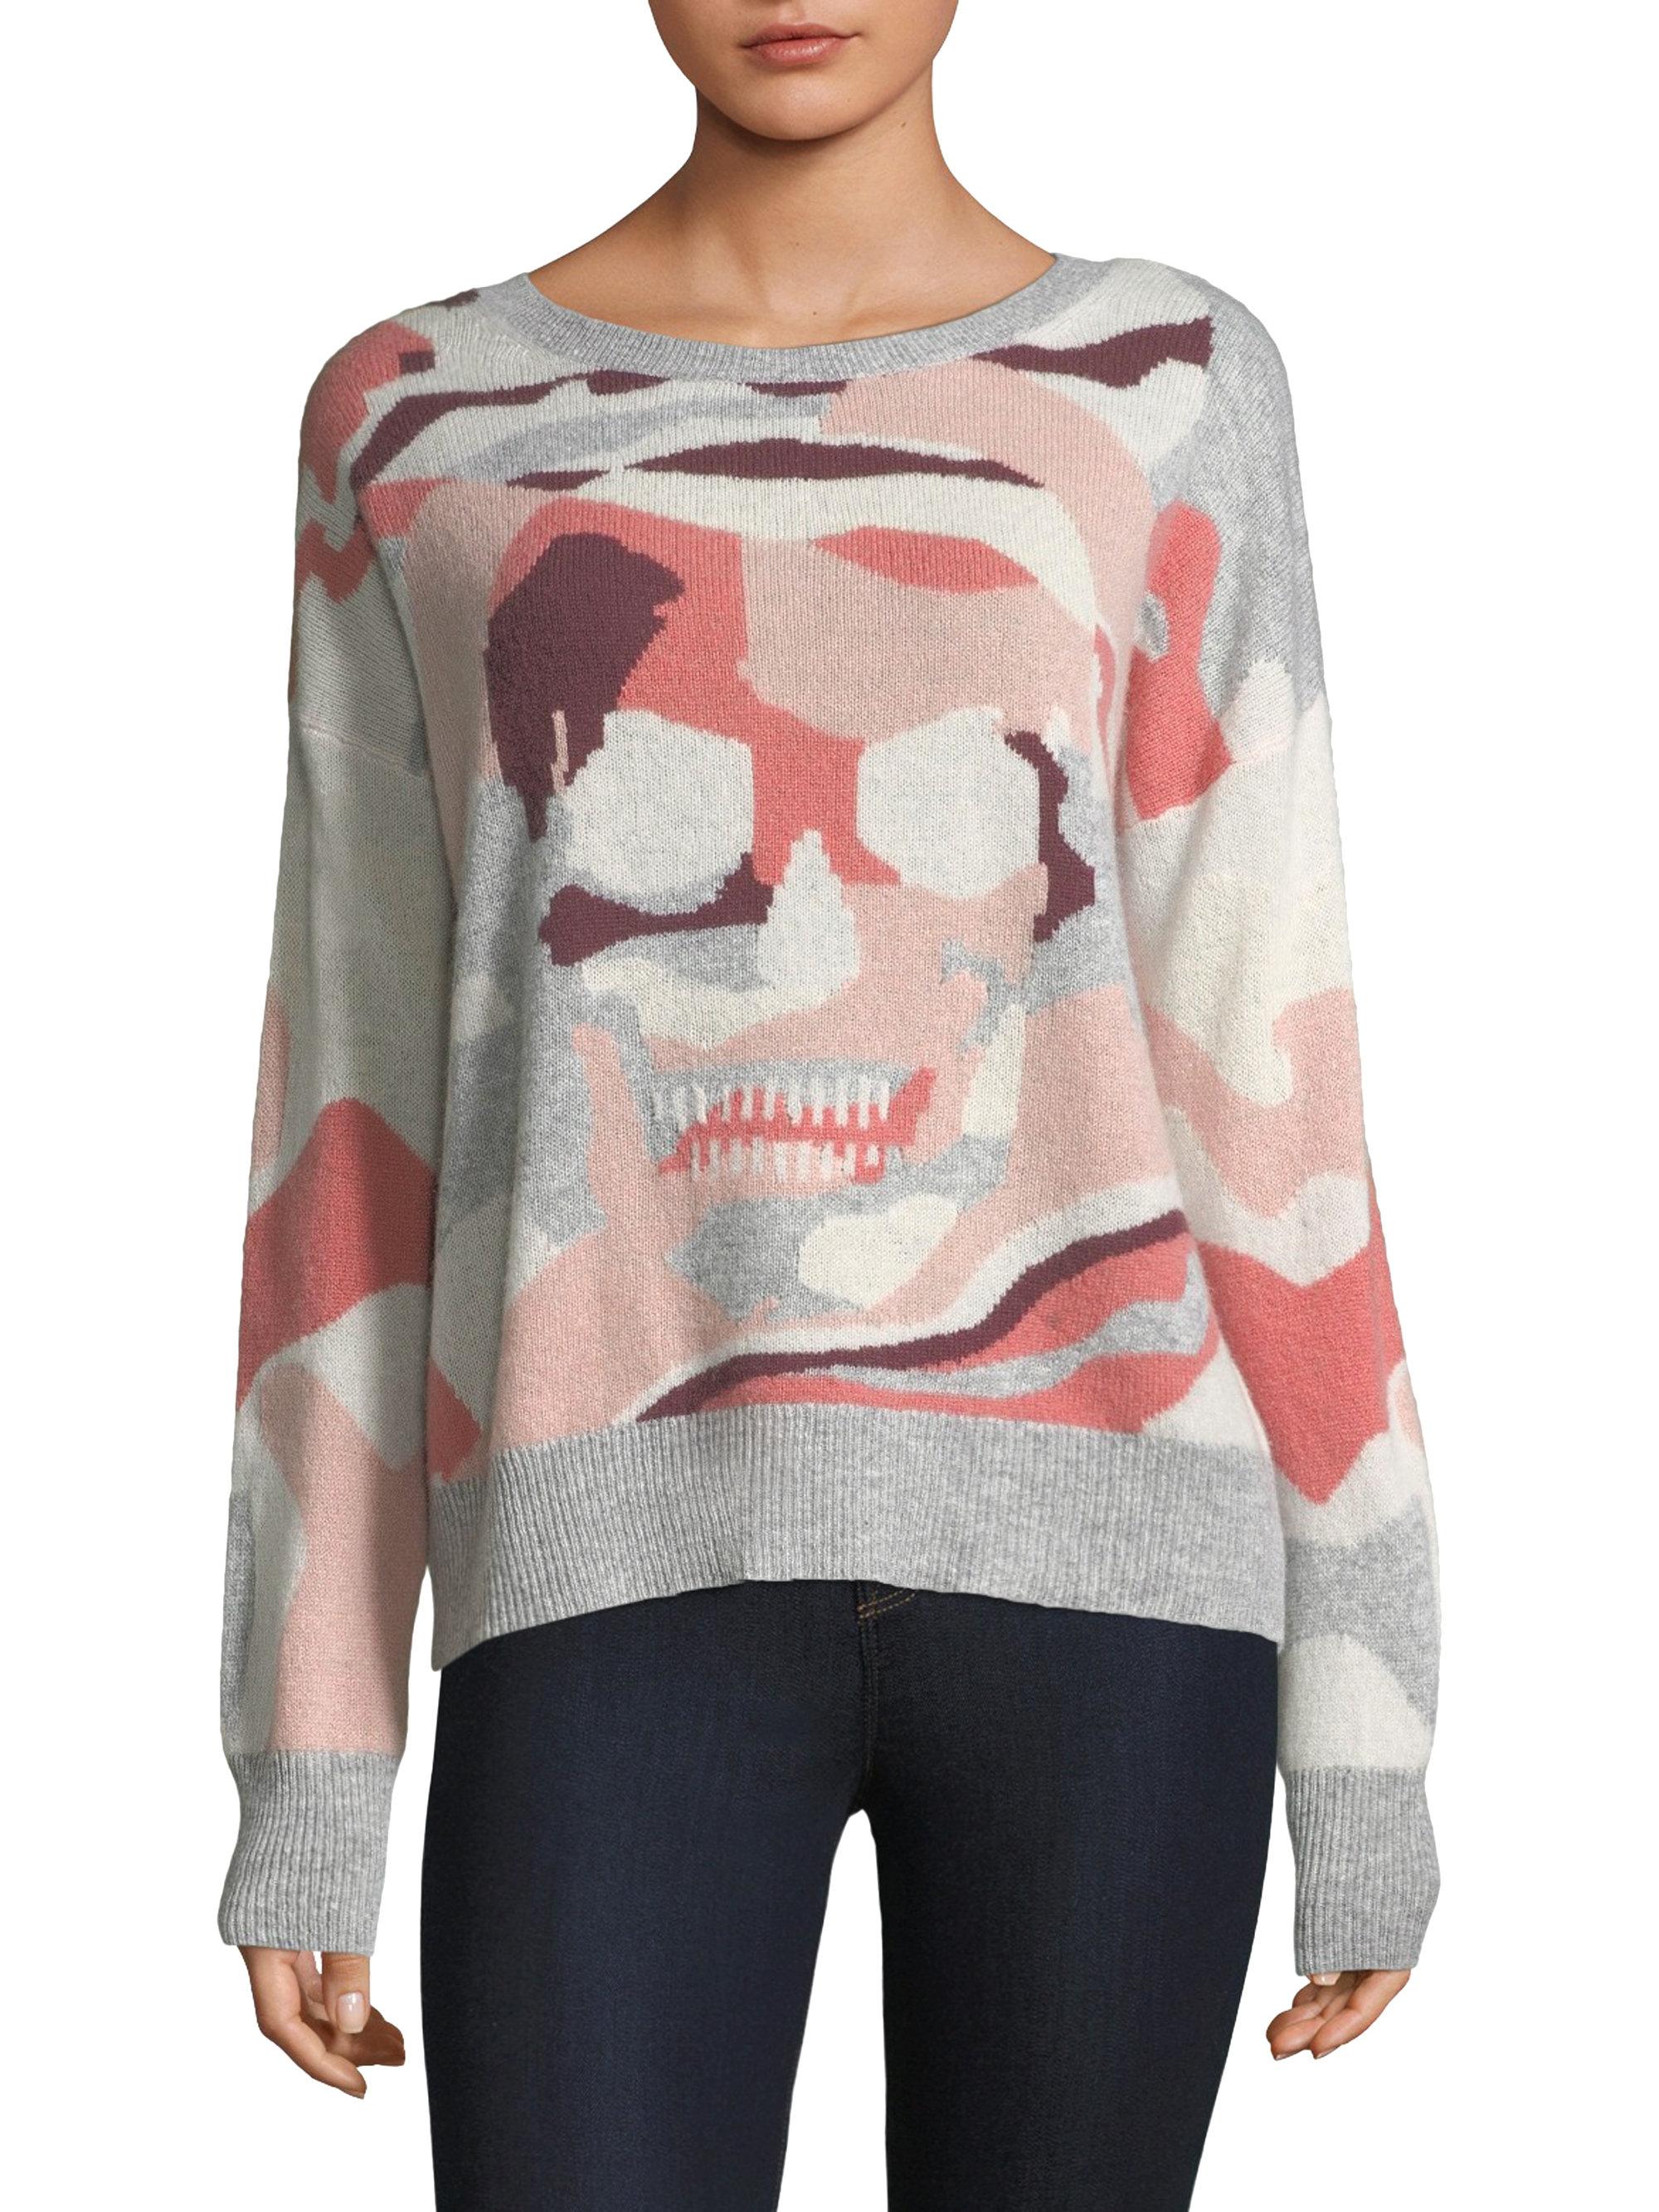 360cashmere Cashmere Camouflage Skull Sweater in Pink - Lyst